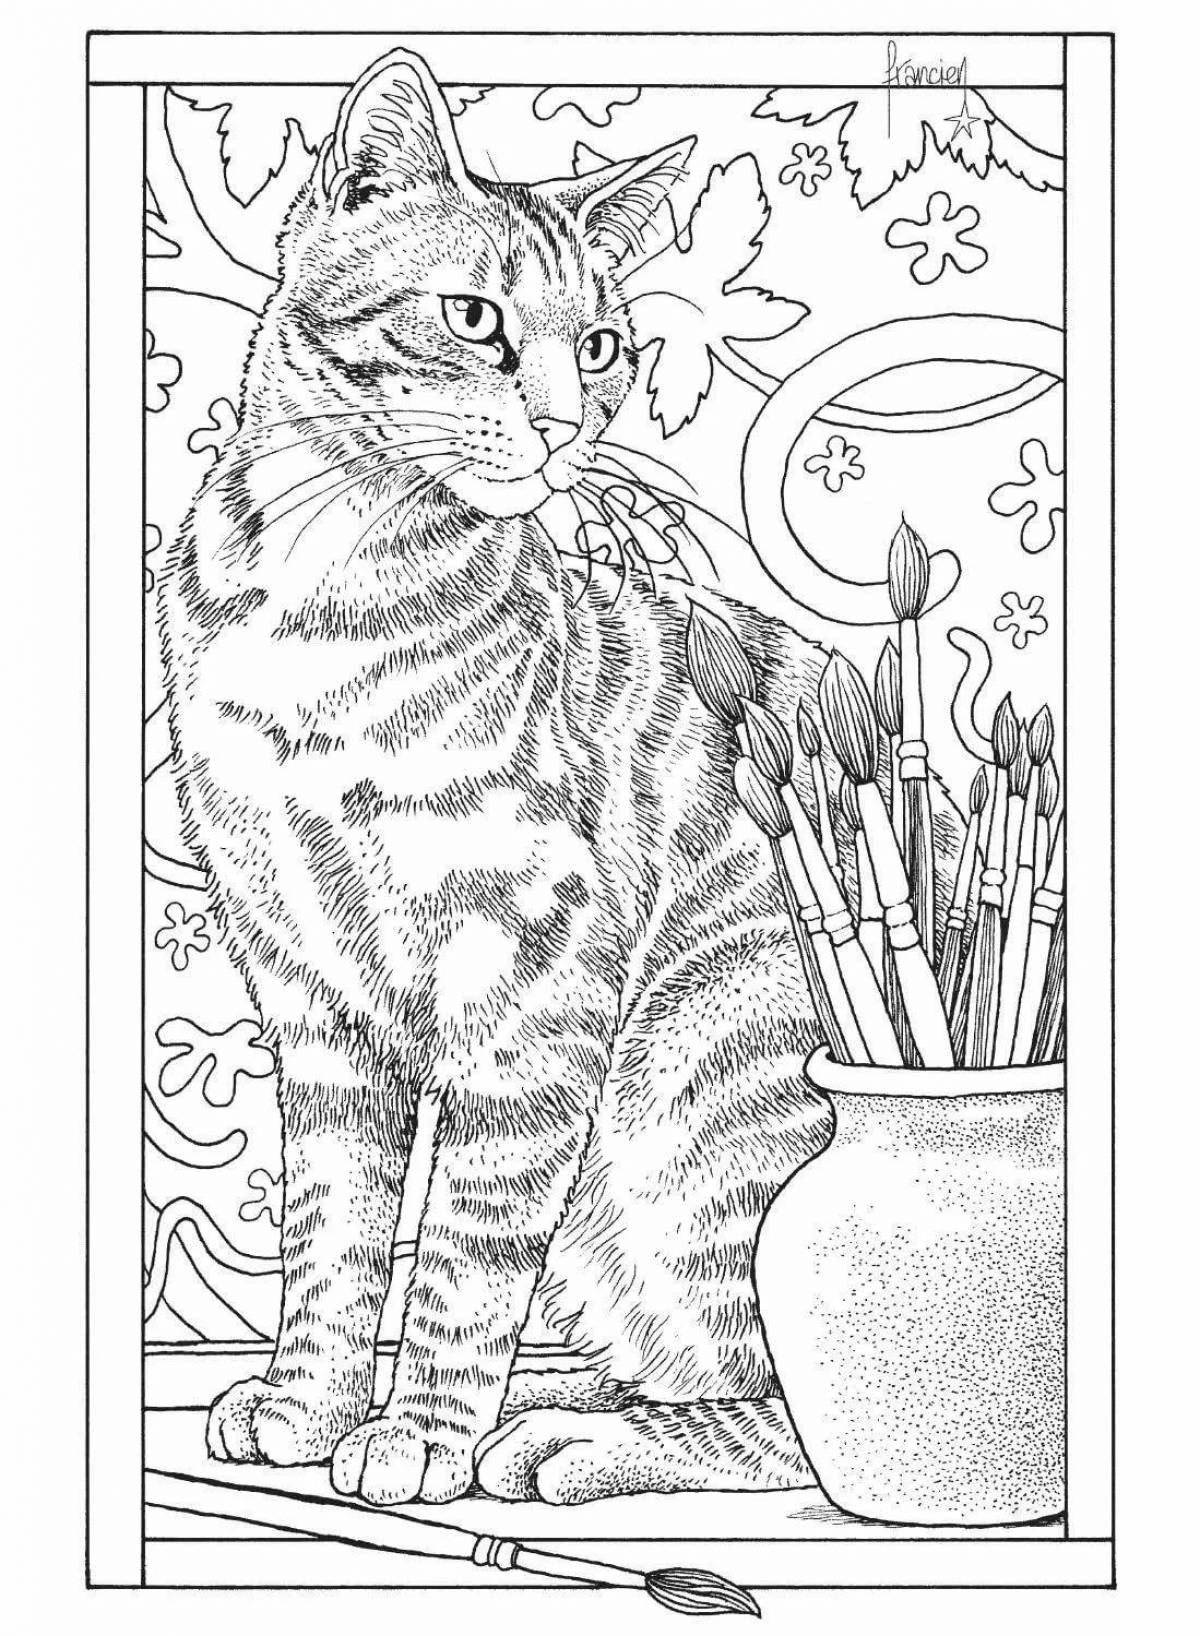 Adorable cat coloring by number